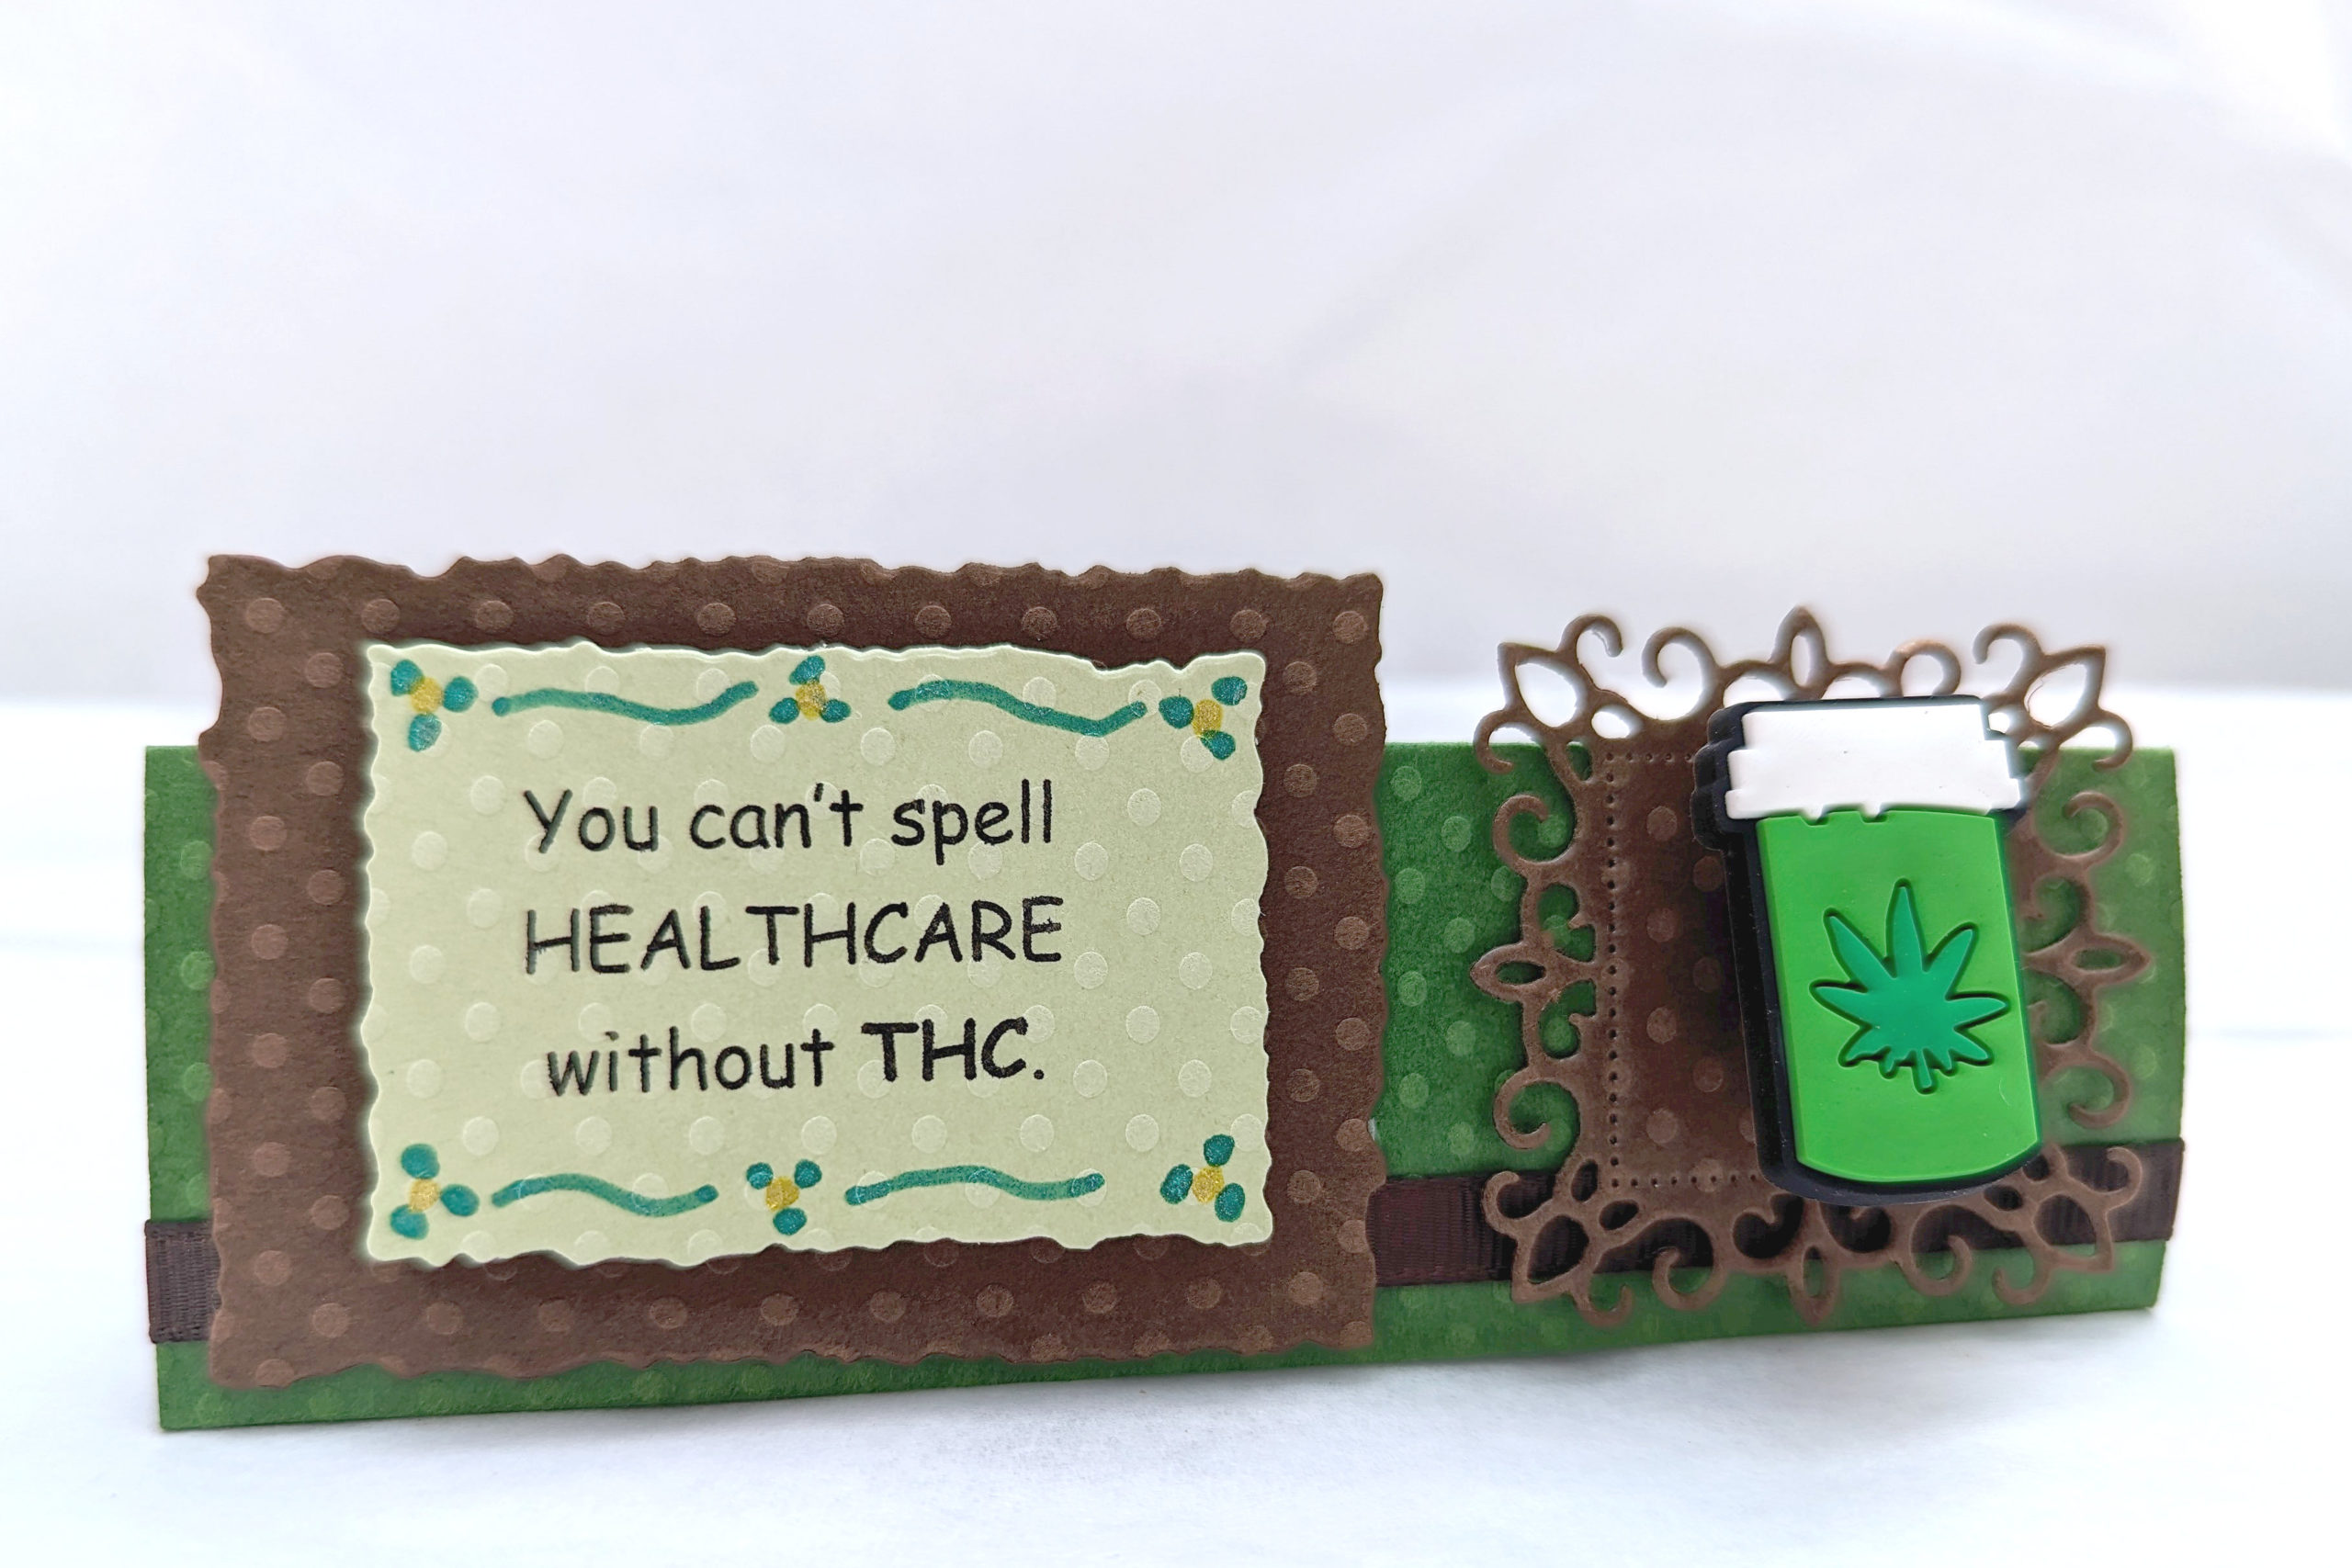 You can't spell HEALTHCARE without THC